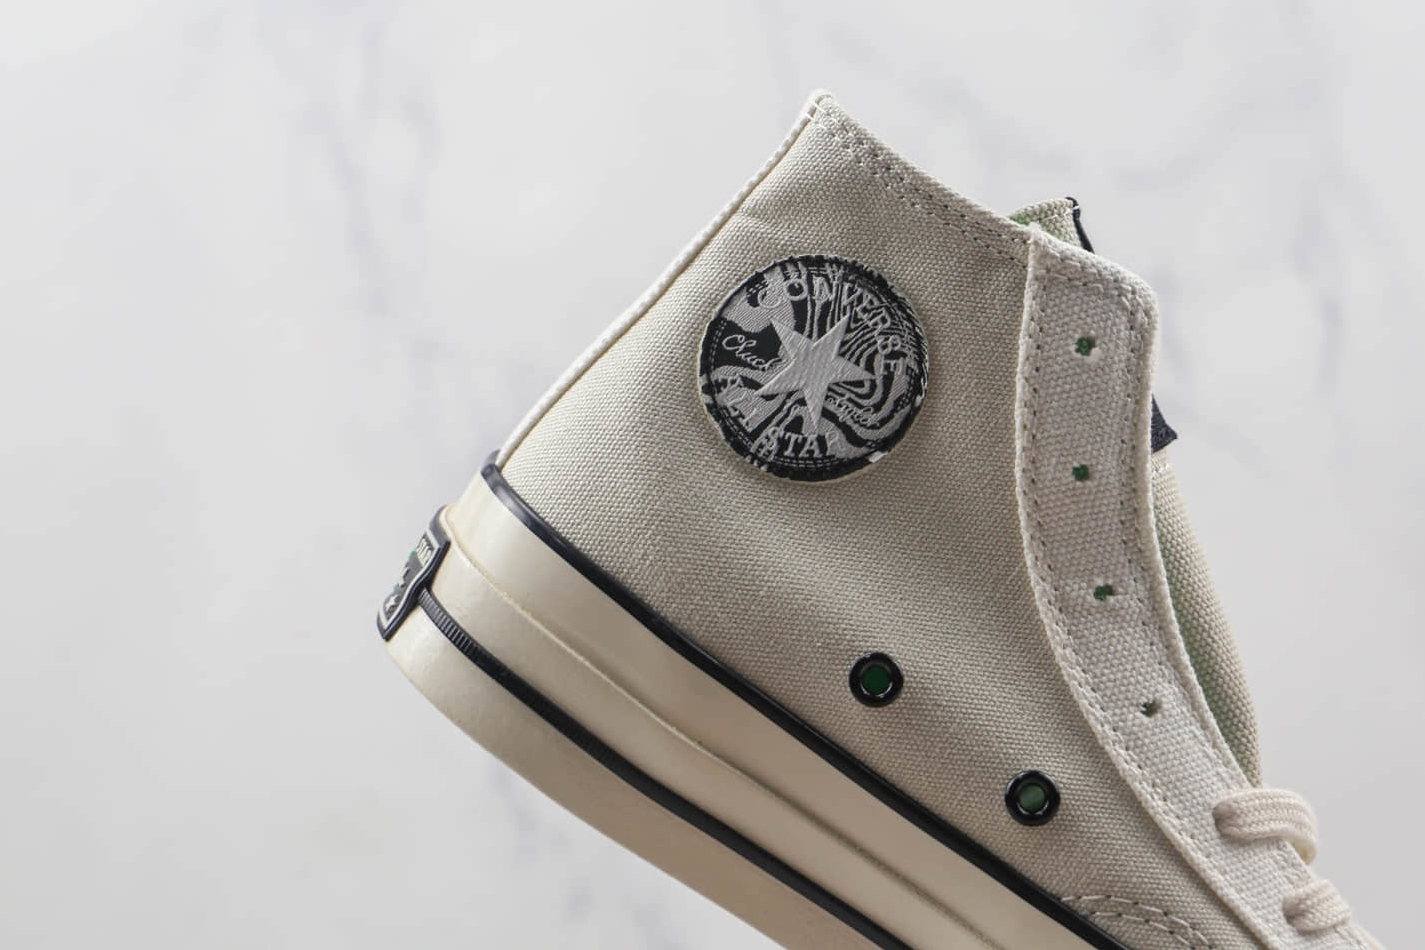 Converse Chuck Taylor All-Star 1970s Hi Green Black White A00742C – Vintage Charm with a Classic Twist